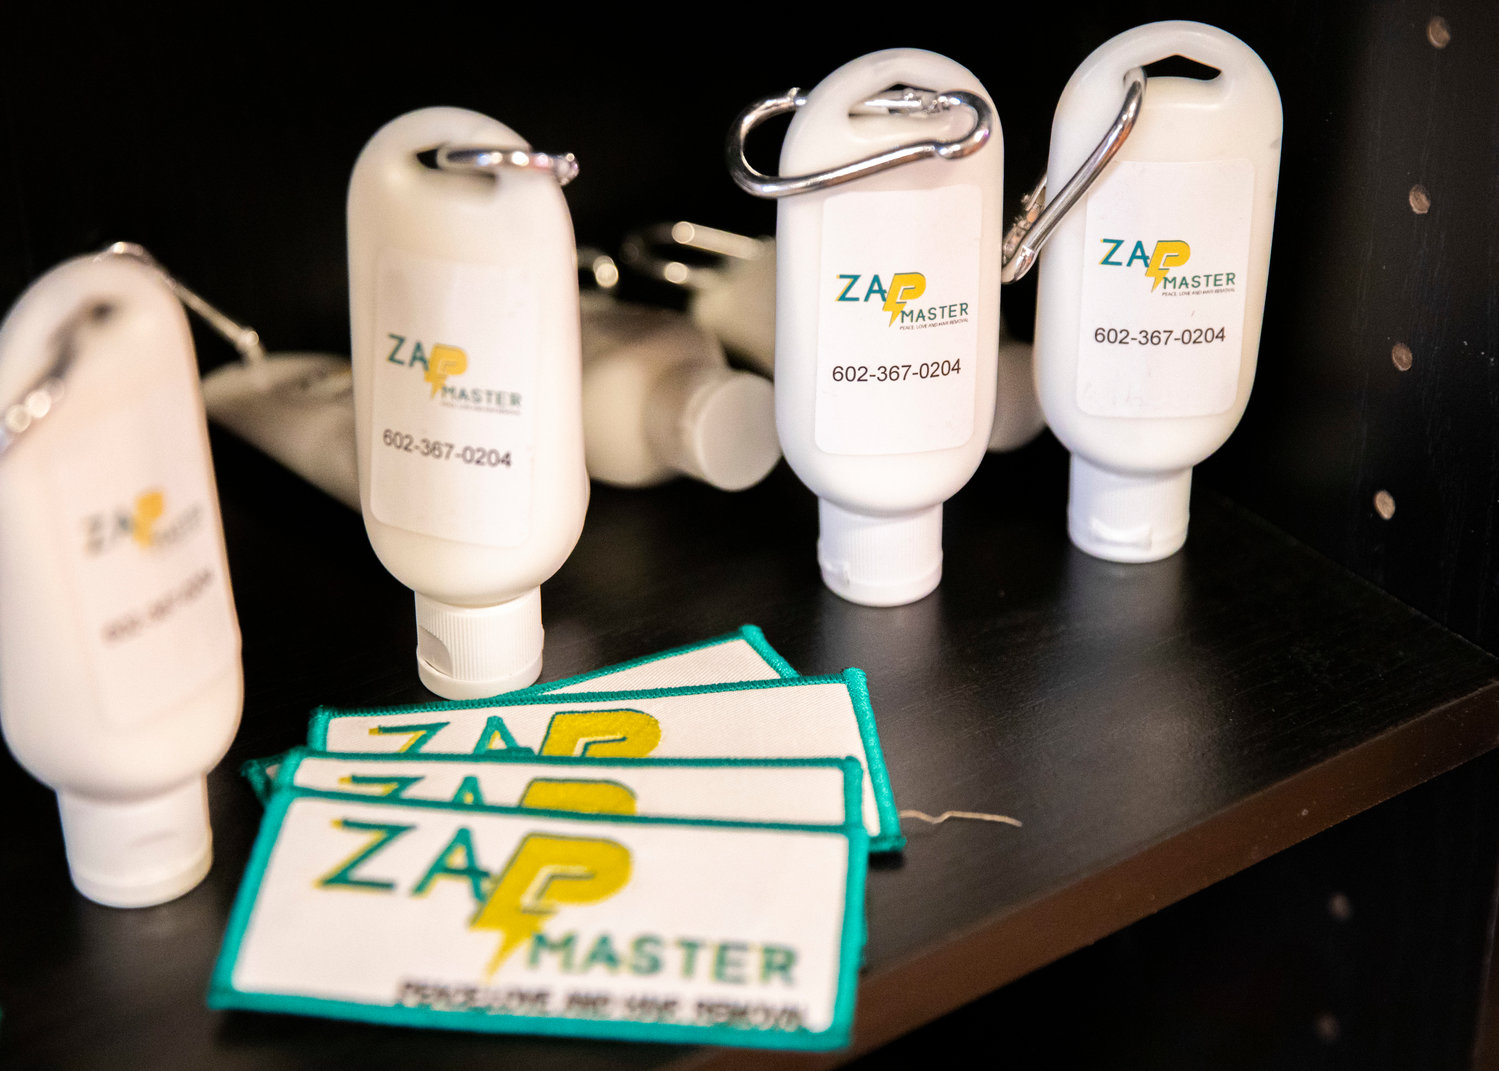 Products and patches sit on display at Zap Master Electrology in downtown Centralia on Thursday.